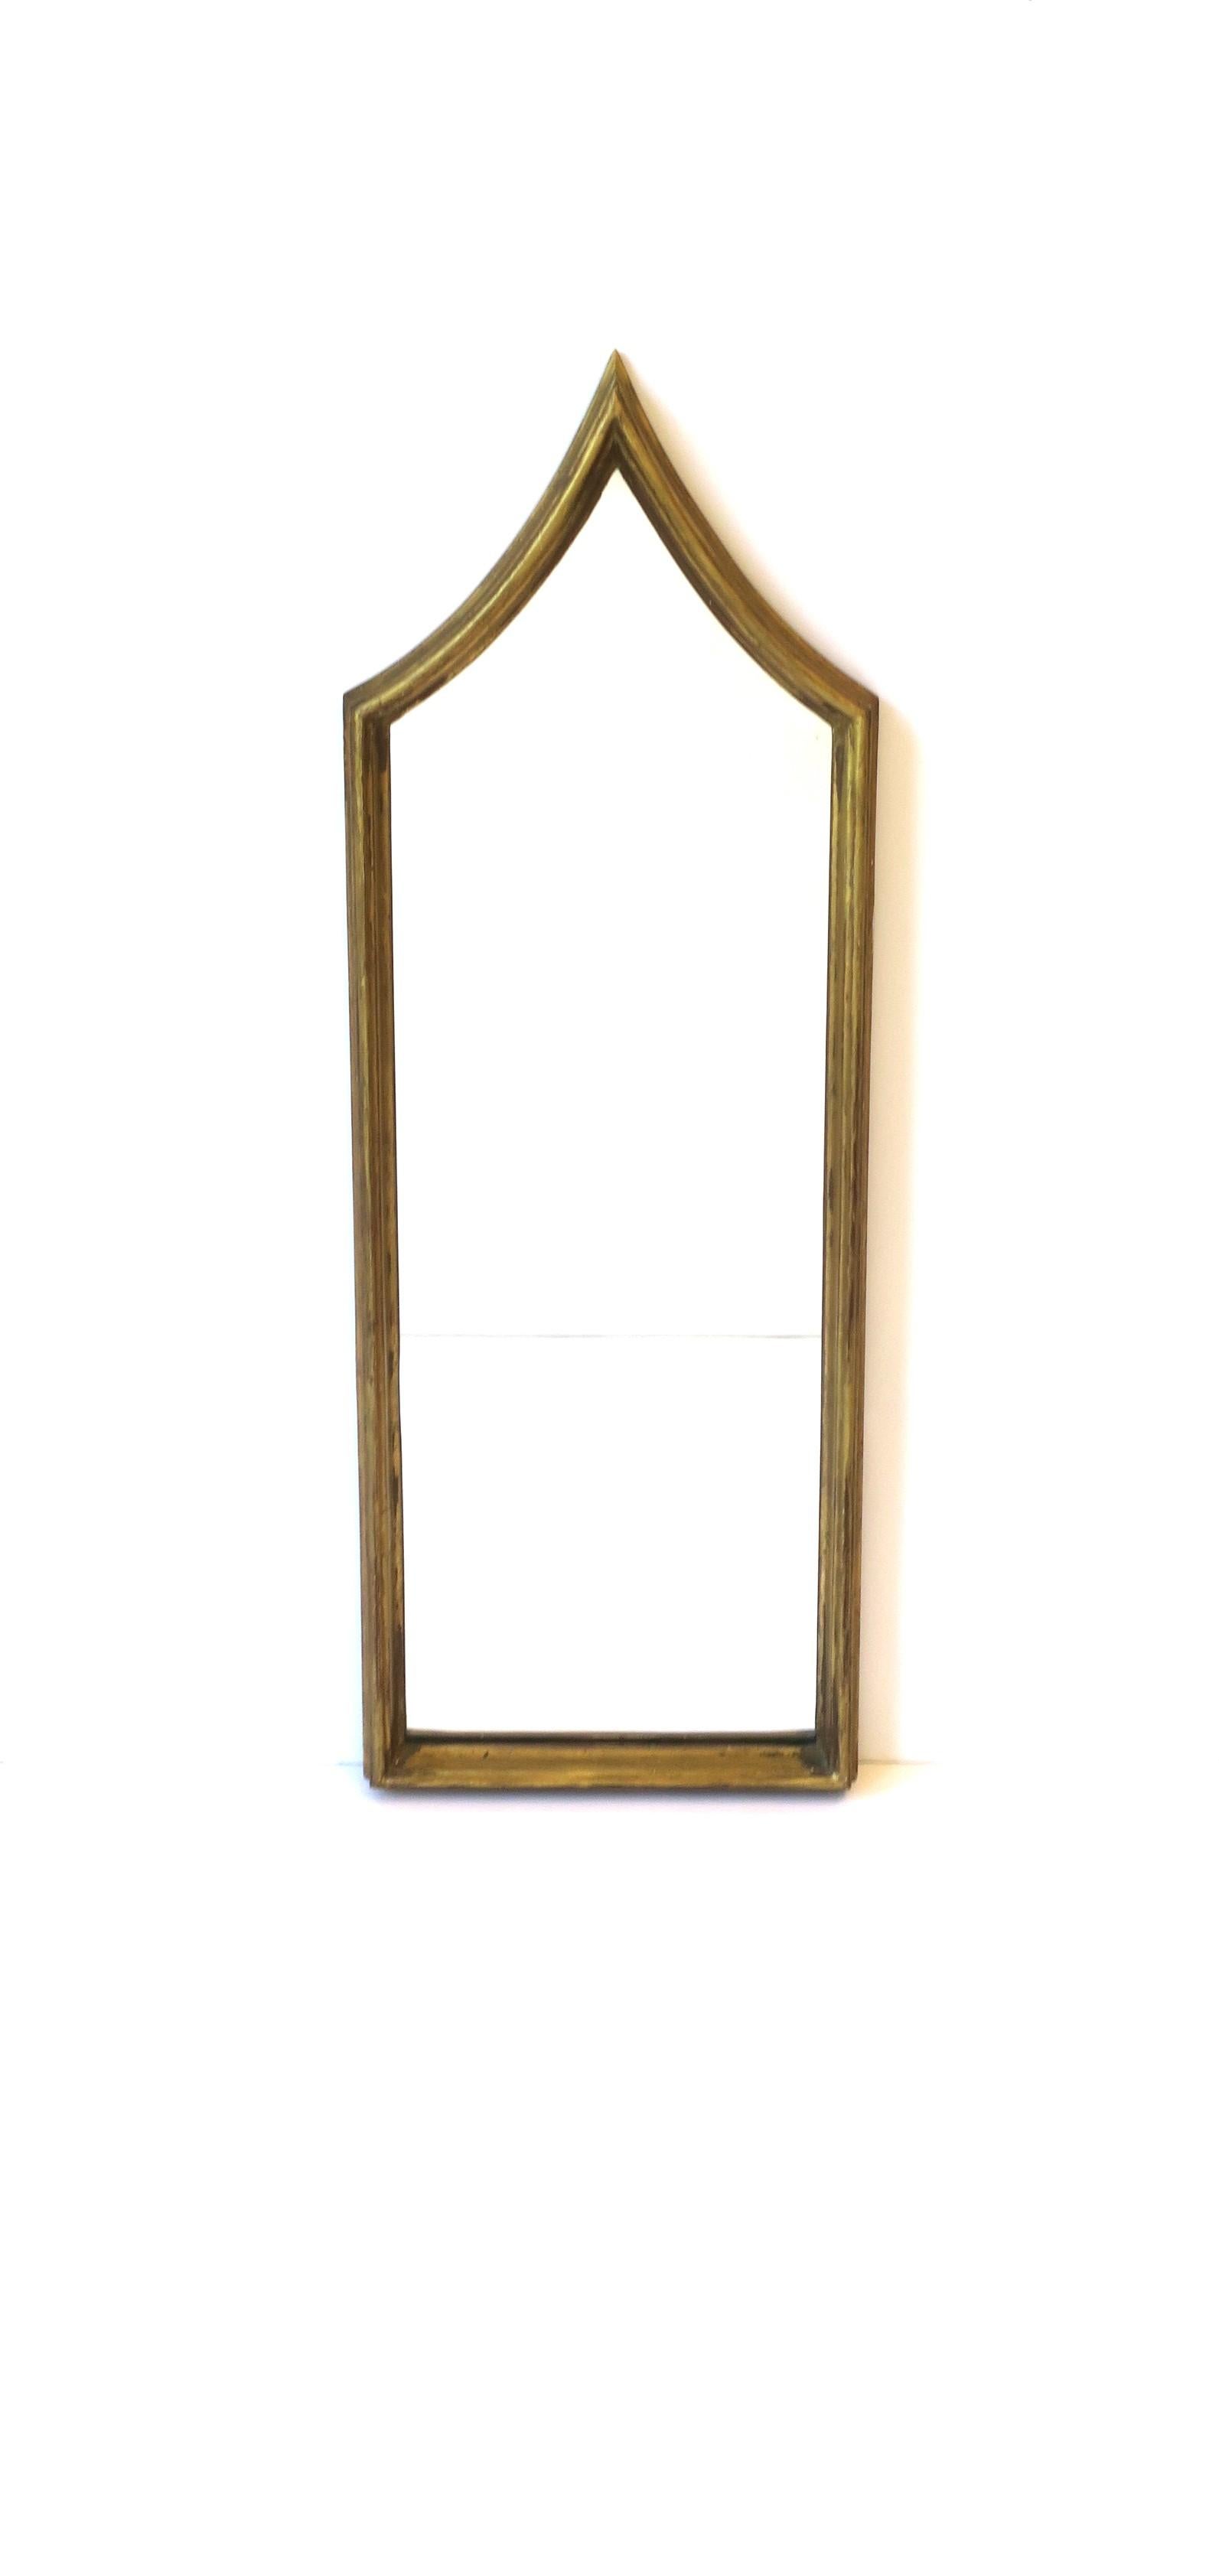 A tall slender Italian mirror with a gold giltwood frame in the Gothic design style, circa early to mid-20th century, Italy. A great mirror for a vanity, hall, foyer, etc., where a tall slender mirror is needed. Mirror shown with Champagne glass for